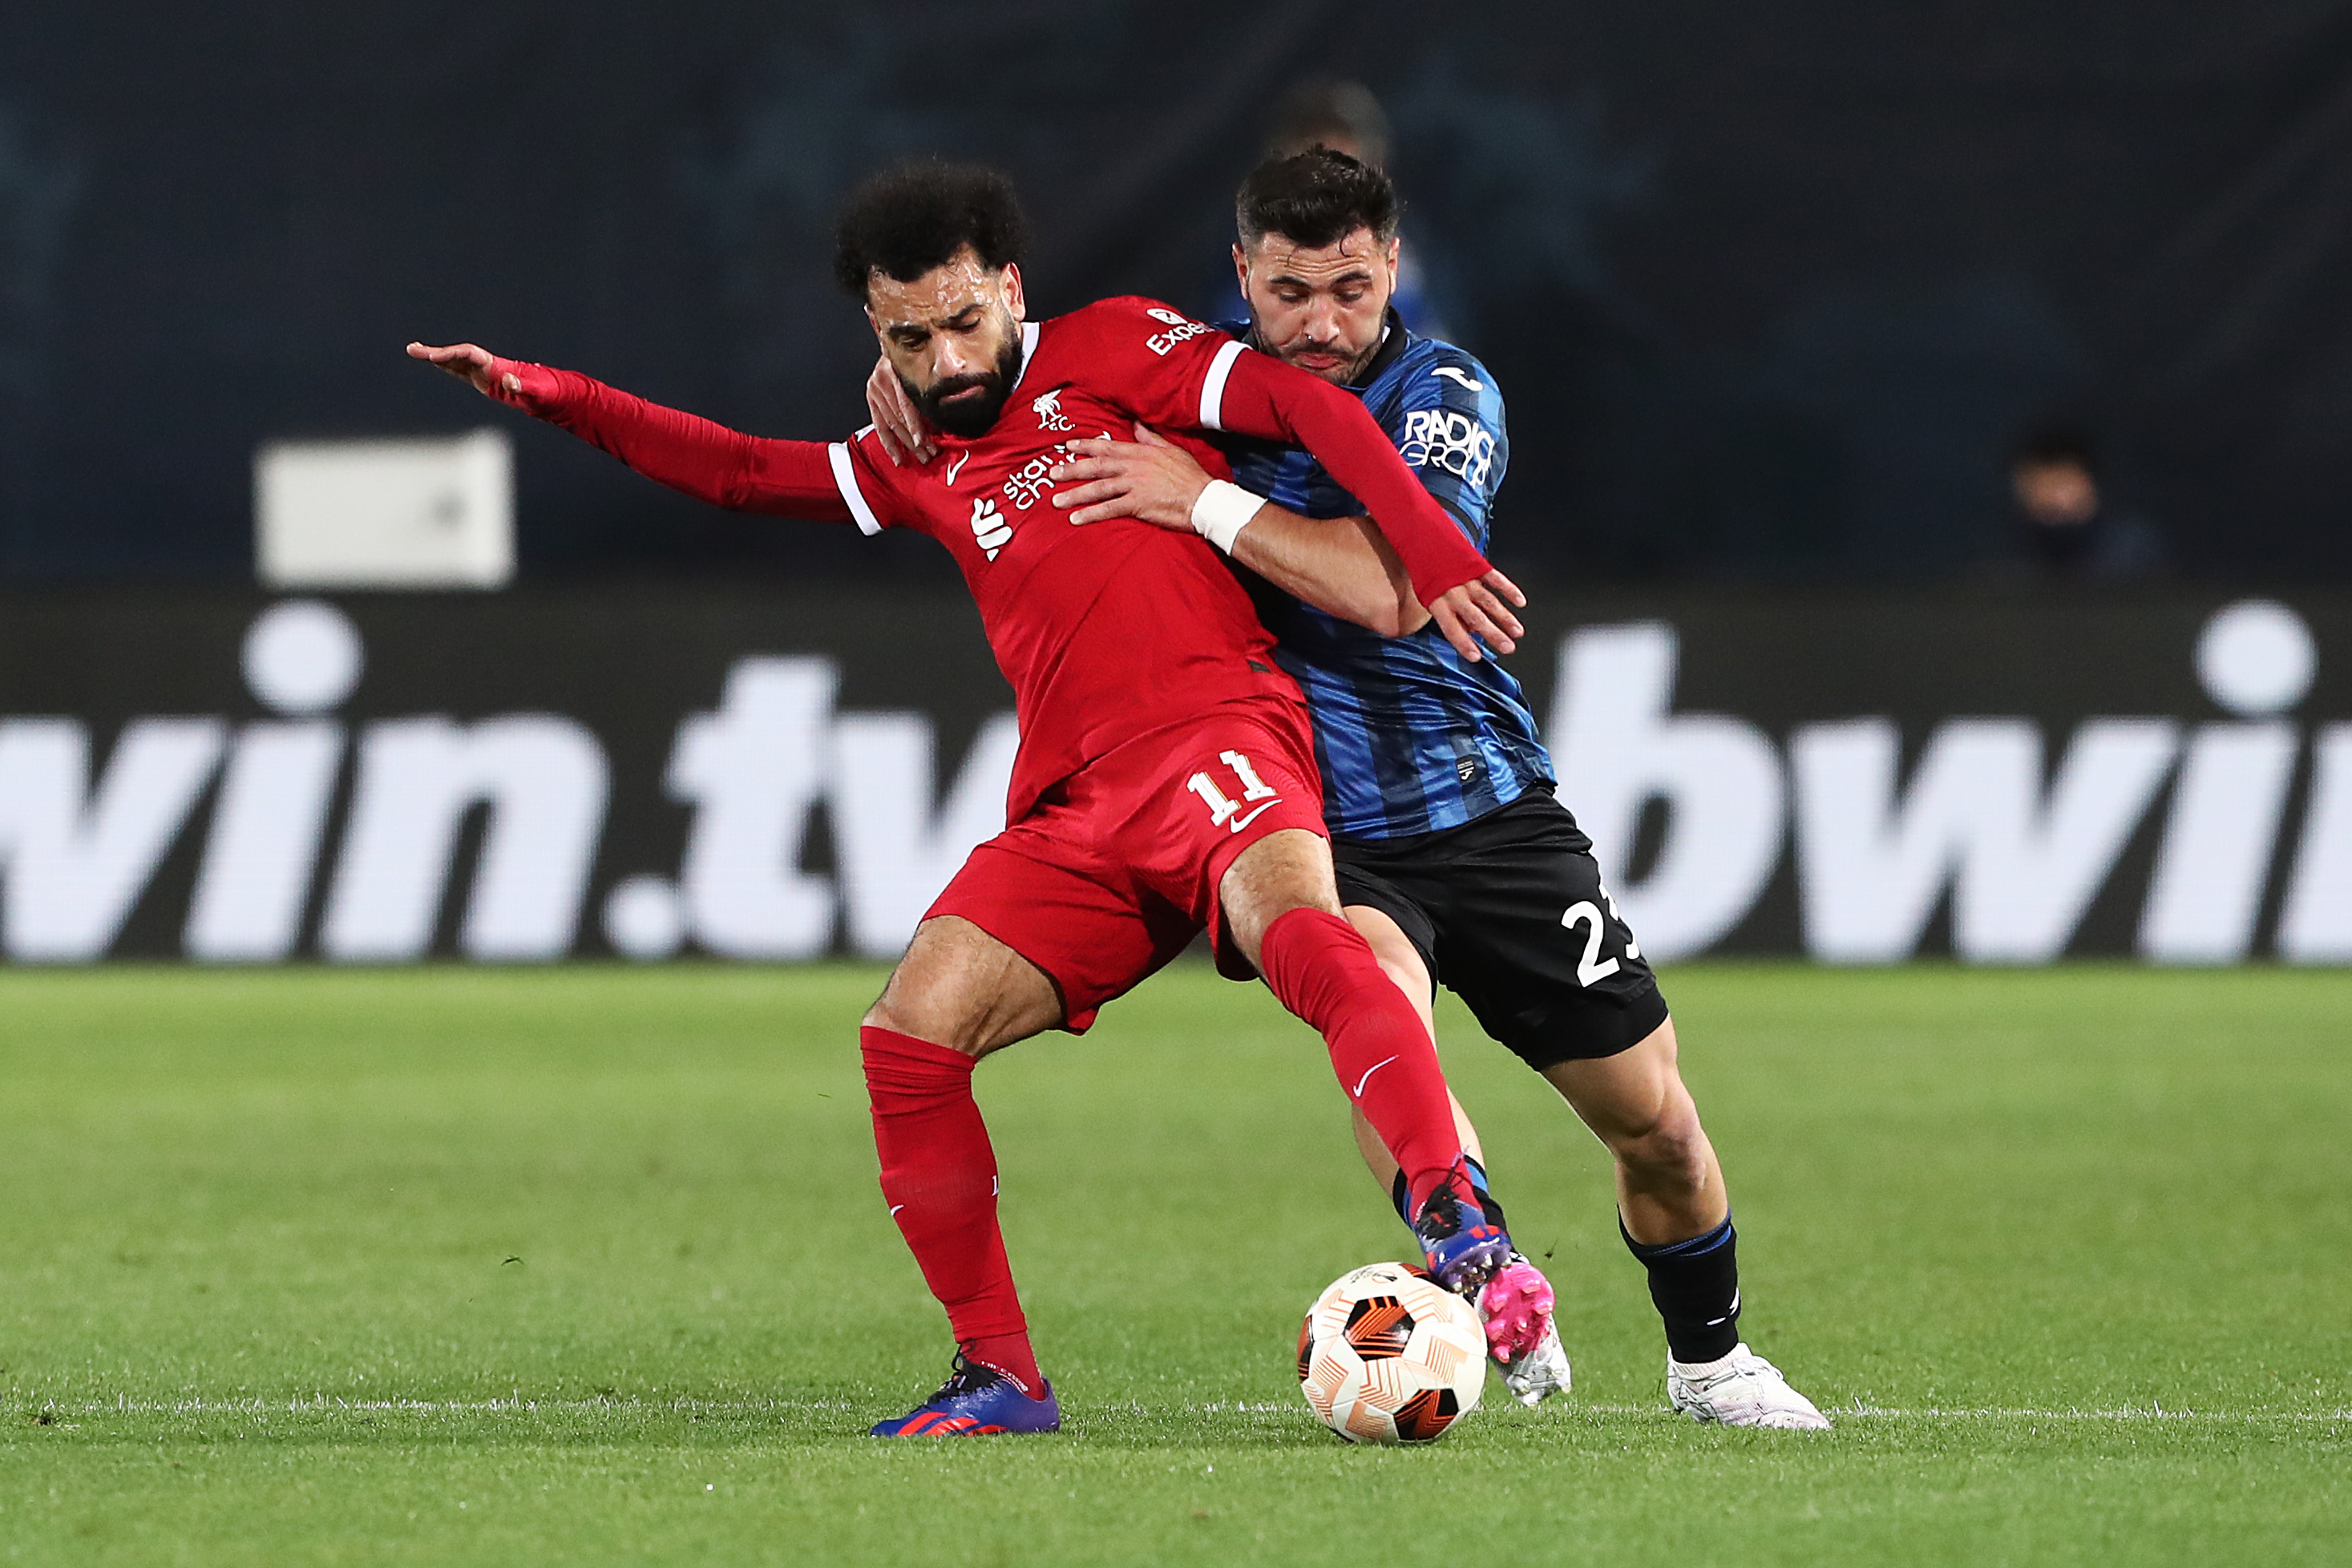 BERGAMO, ITALY - APRIL 18: Mohamed Salah of Liverpool is challenged by Sead Kolasinac of Atalanta BC during the UEFA Europa League 2023/24 Quarter-Final second leg match between Atalanta and Liverpool FC at Stadio Atleti Azzurri d'Italia on April 18, 2024 in Bergamo, Italy. (Photo by Marco Luzzani/Getty Images)